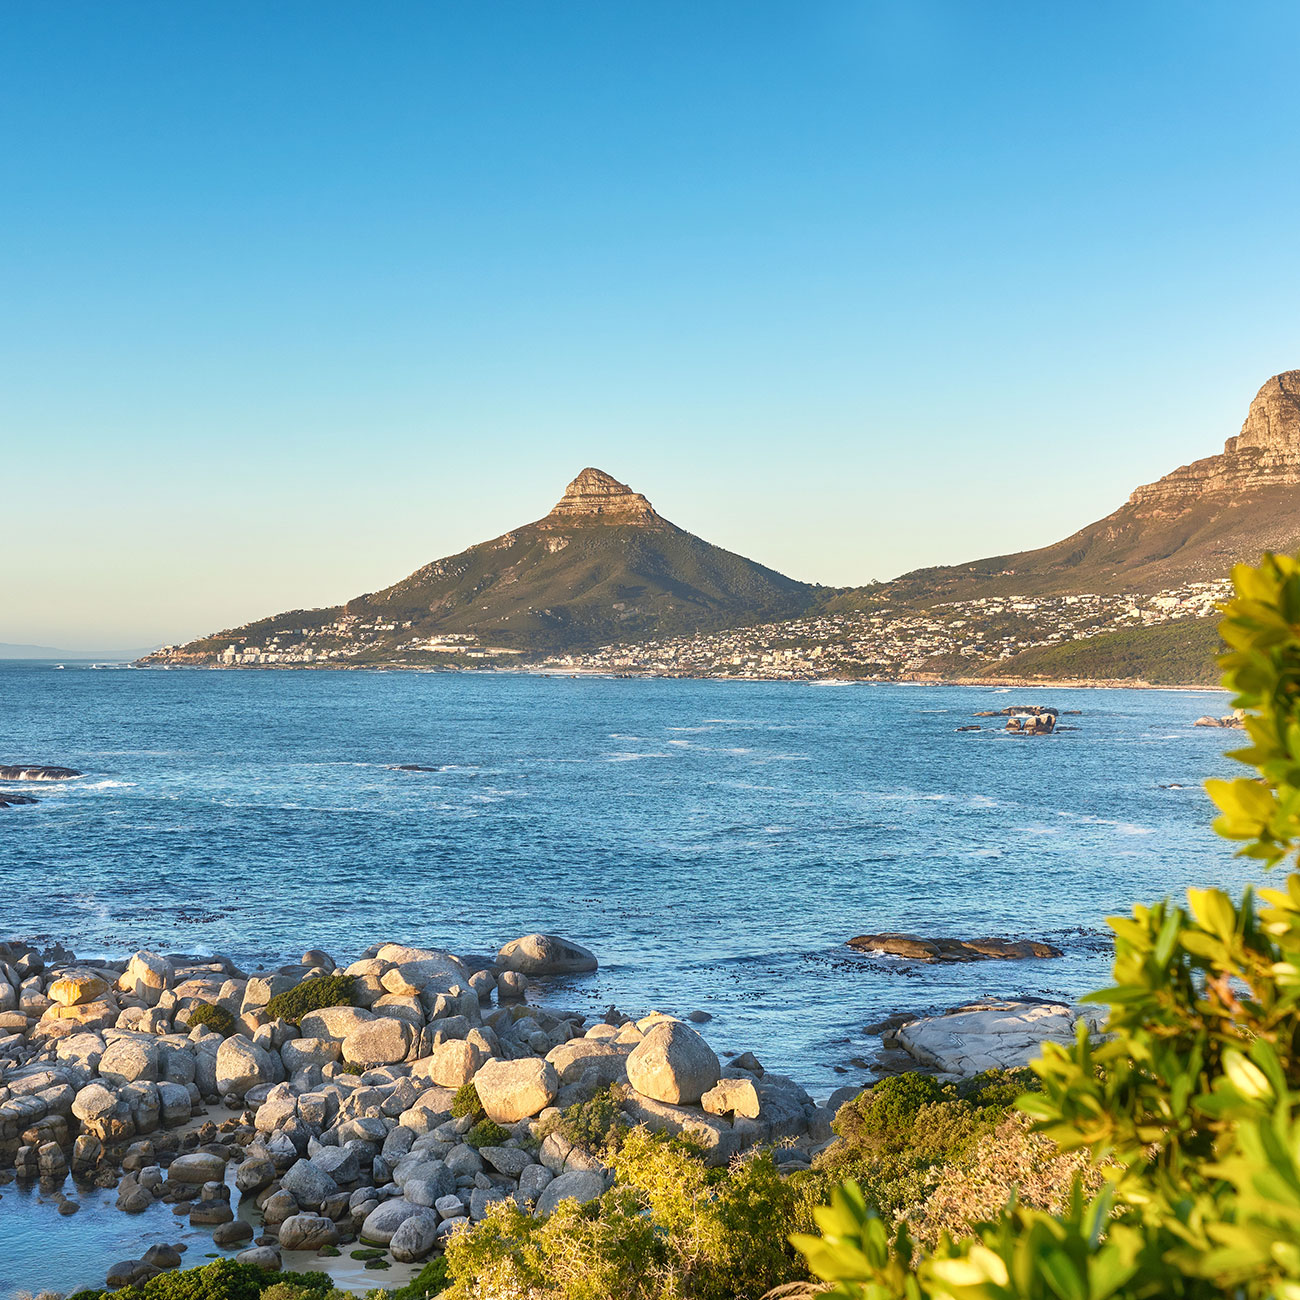 Cape Town & Surroundings (South Africa)